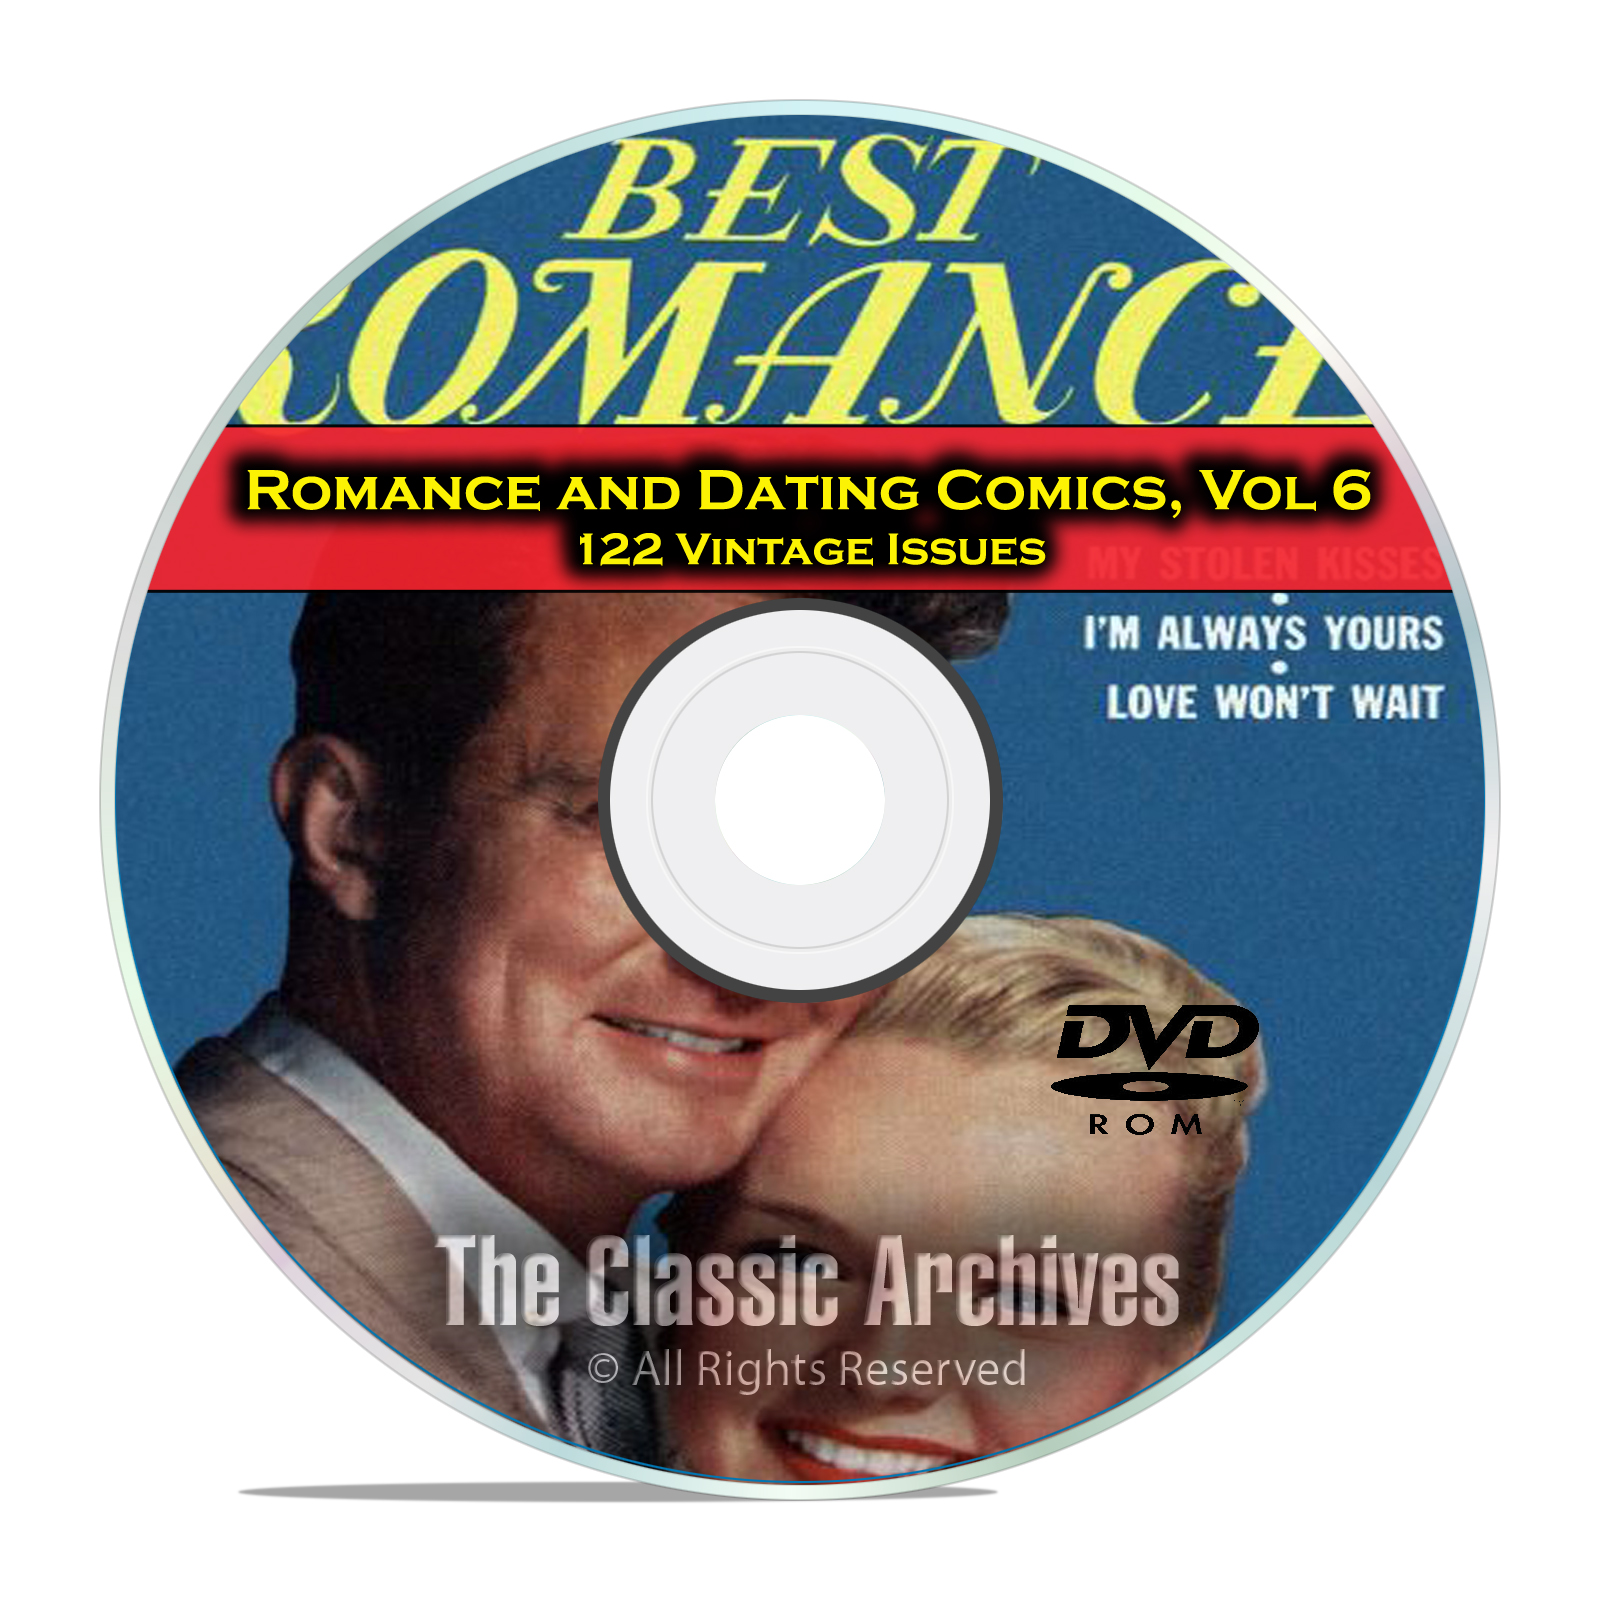 Romance, Love, Dating Comics, Vol 6, Confessions of Lovelorn Golden Age DVD